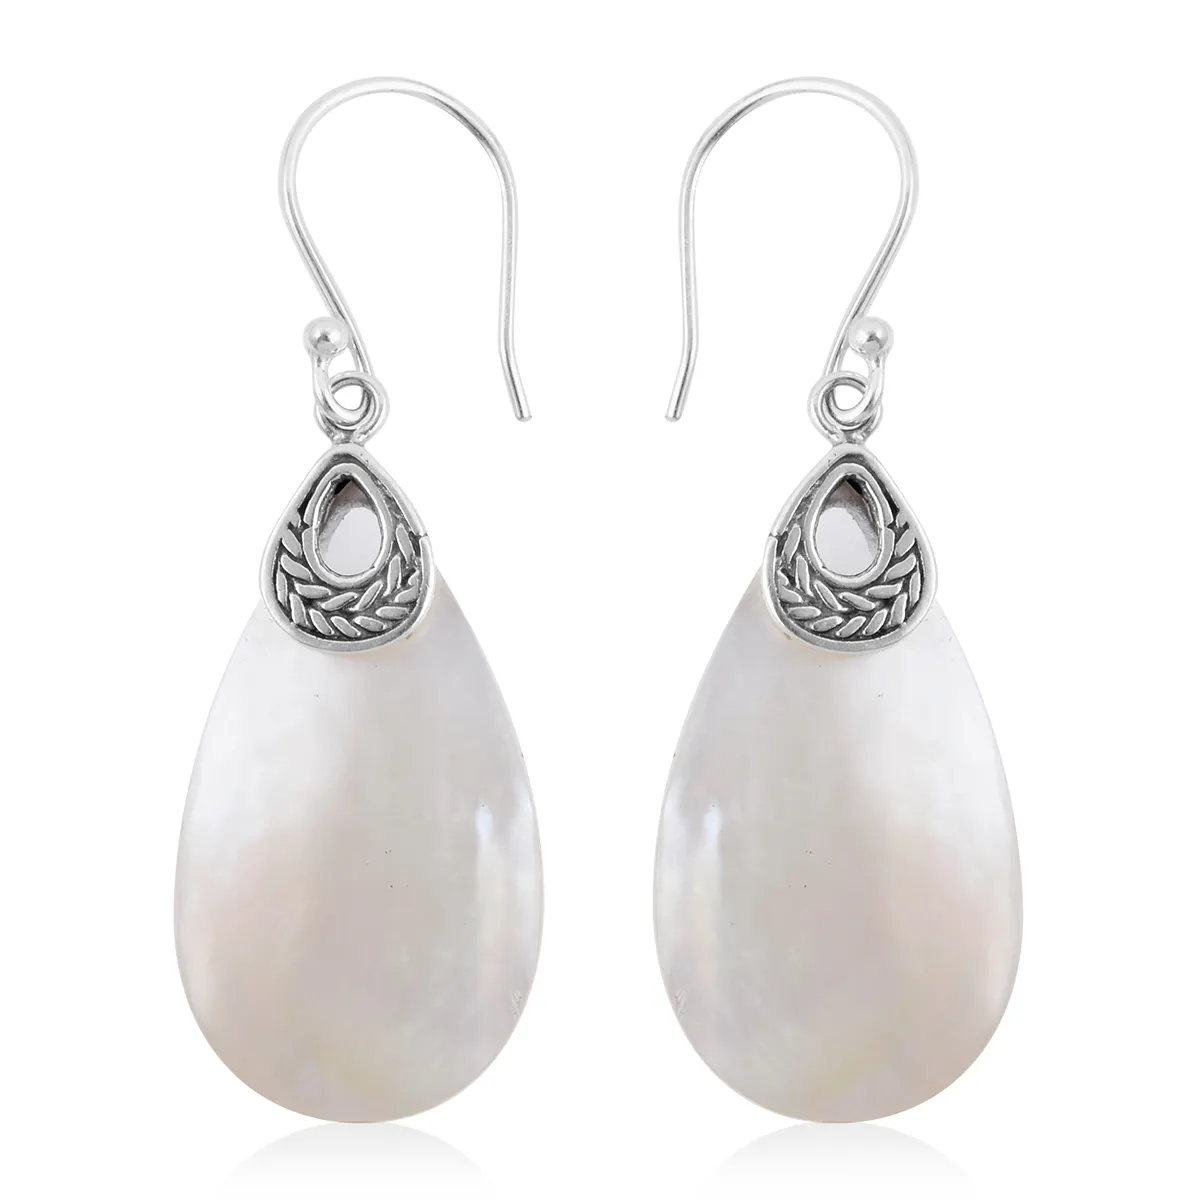 New model Natural Mother Of Pearl Earrings in Sterling Silver best in price by Direct Indian jewelry Manufacturer